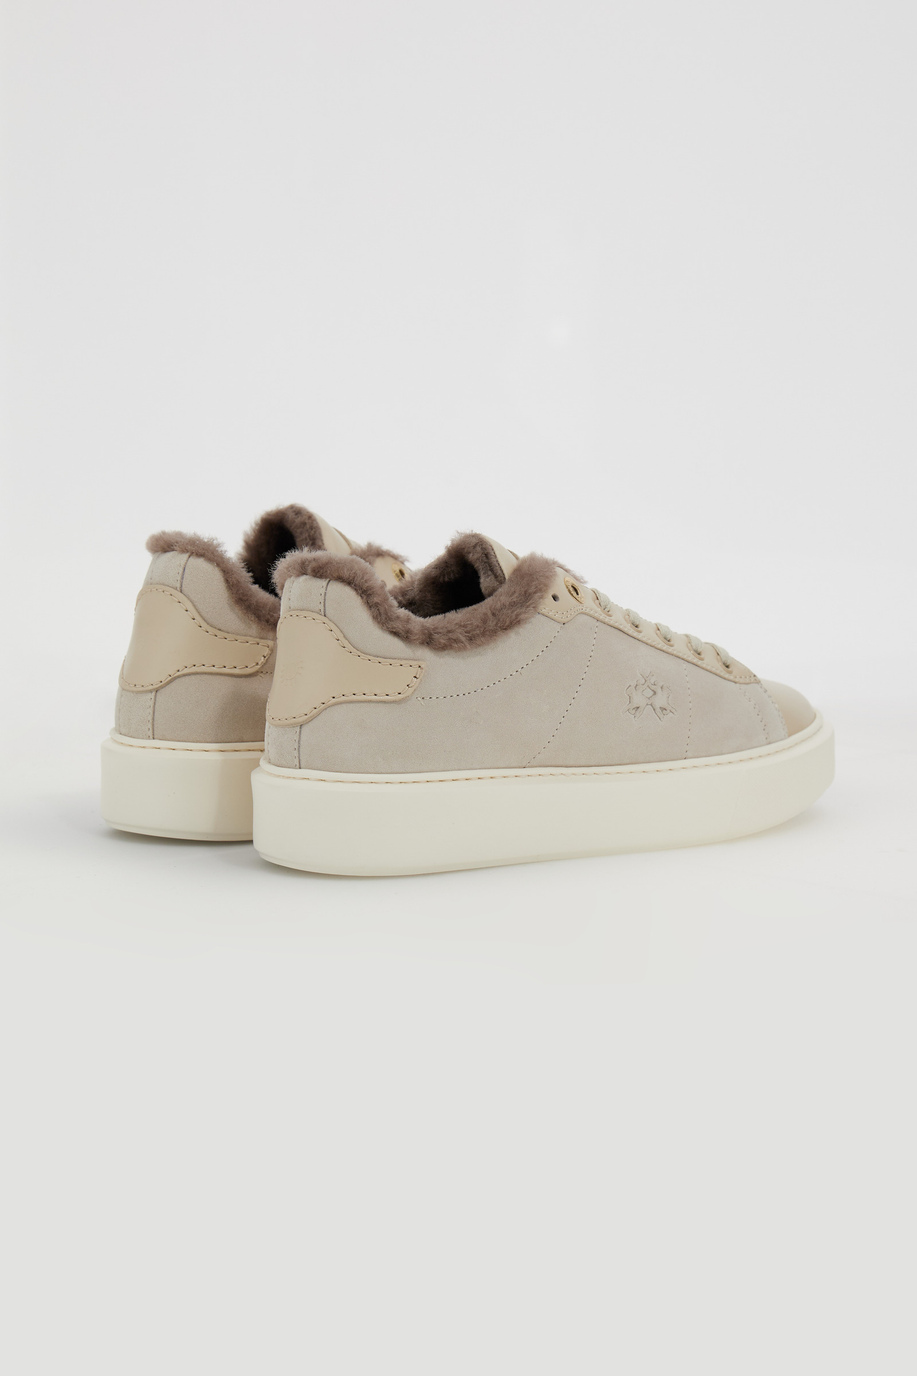 Women's trainers with inner lining - Women | La Martina - Official Online Shop